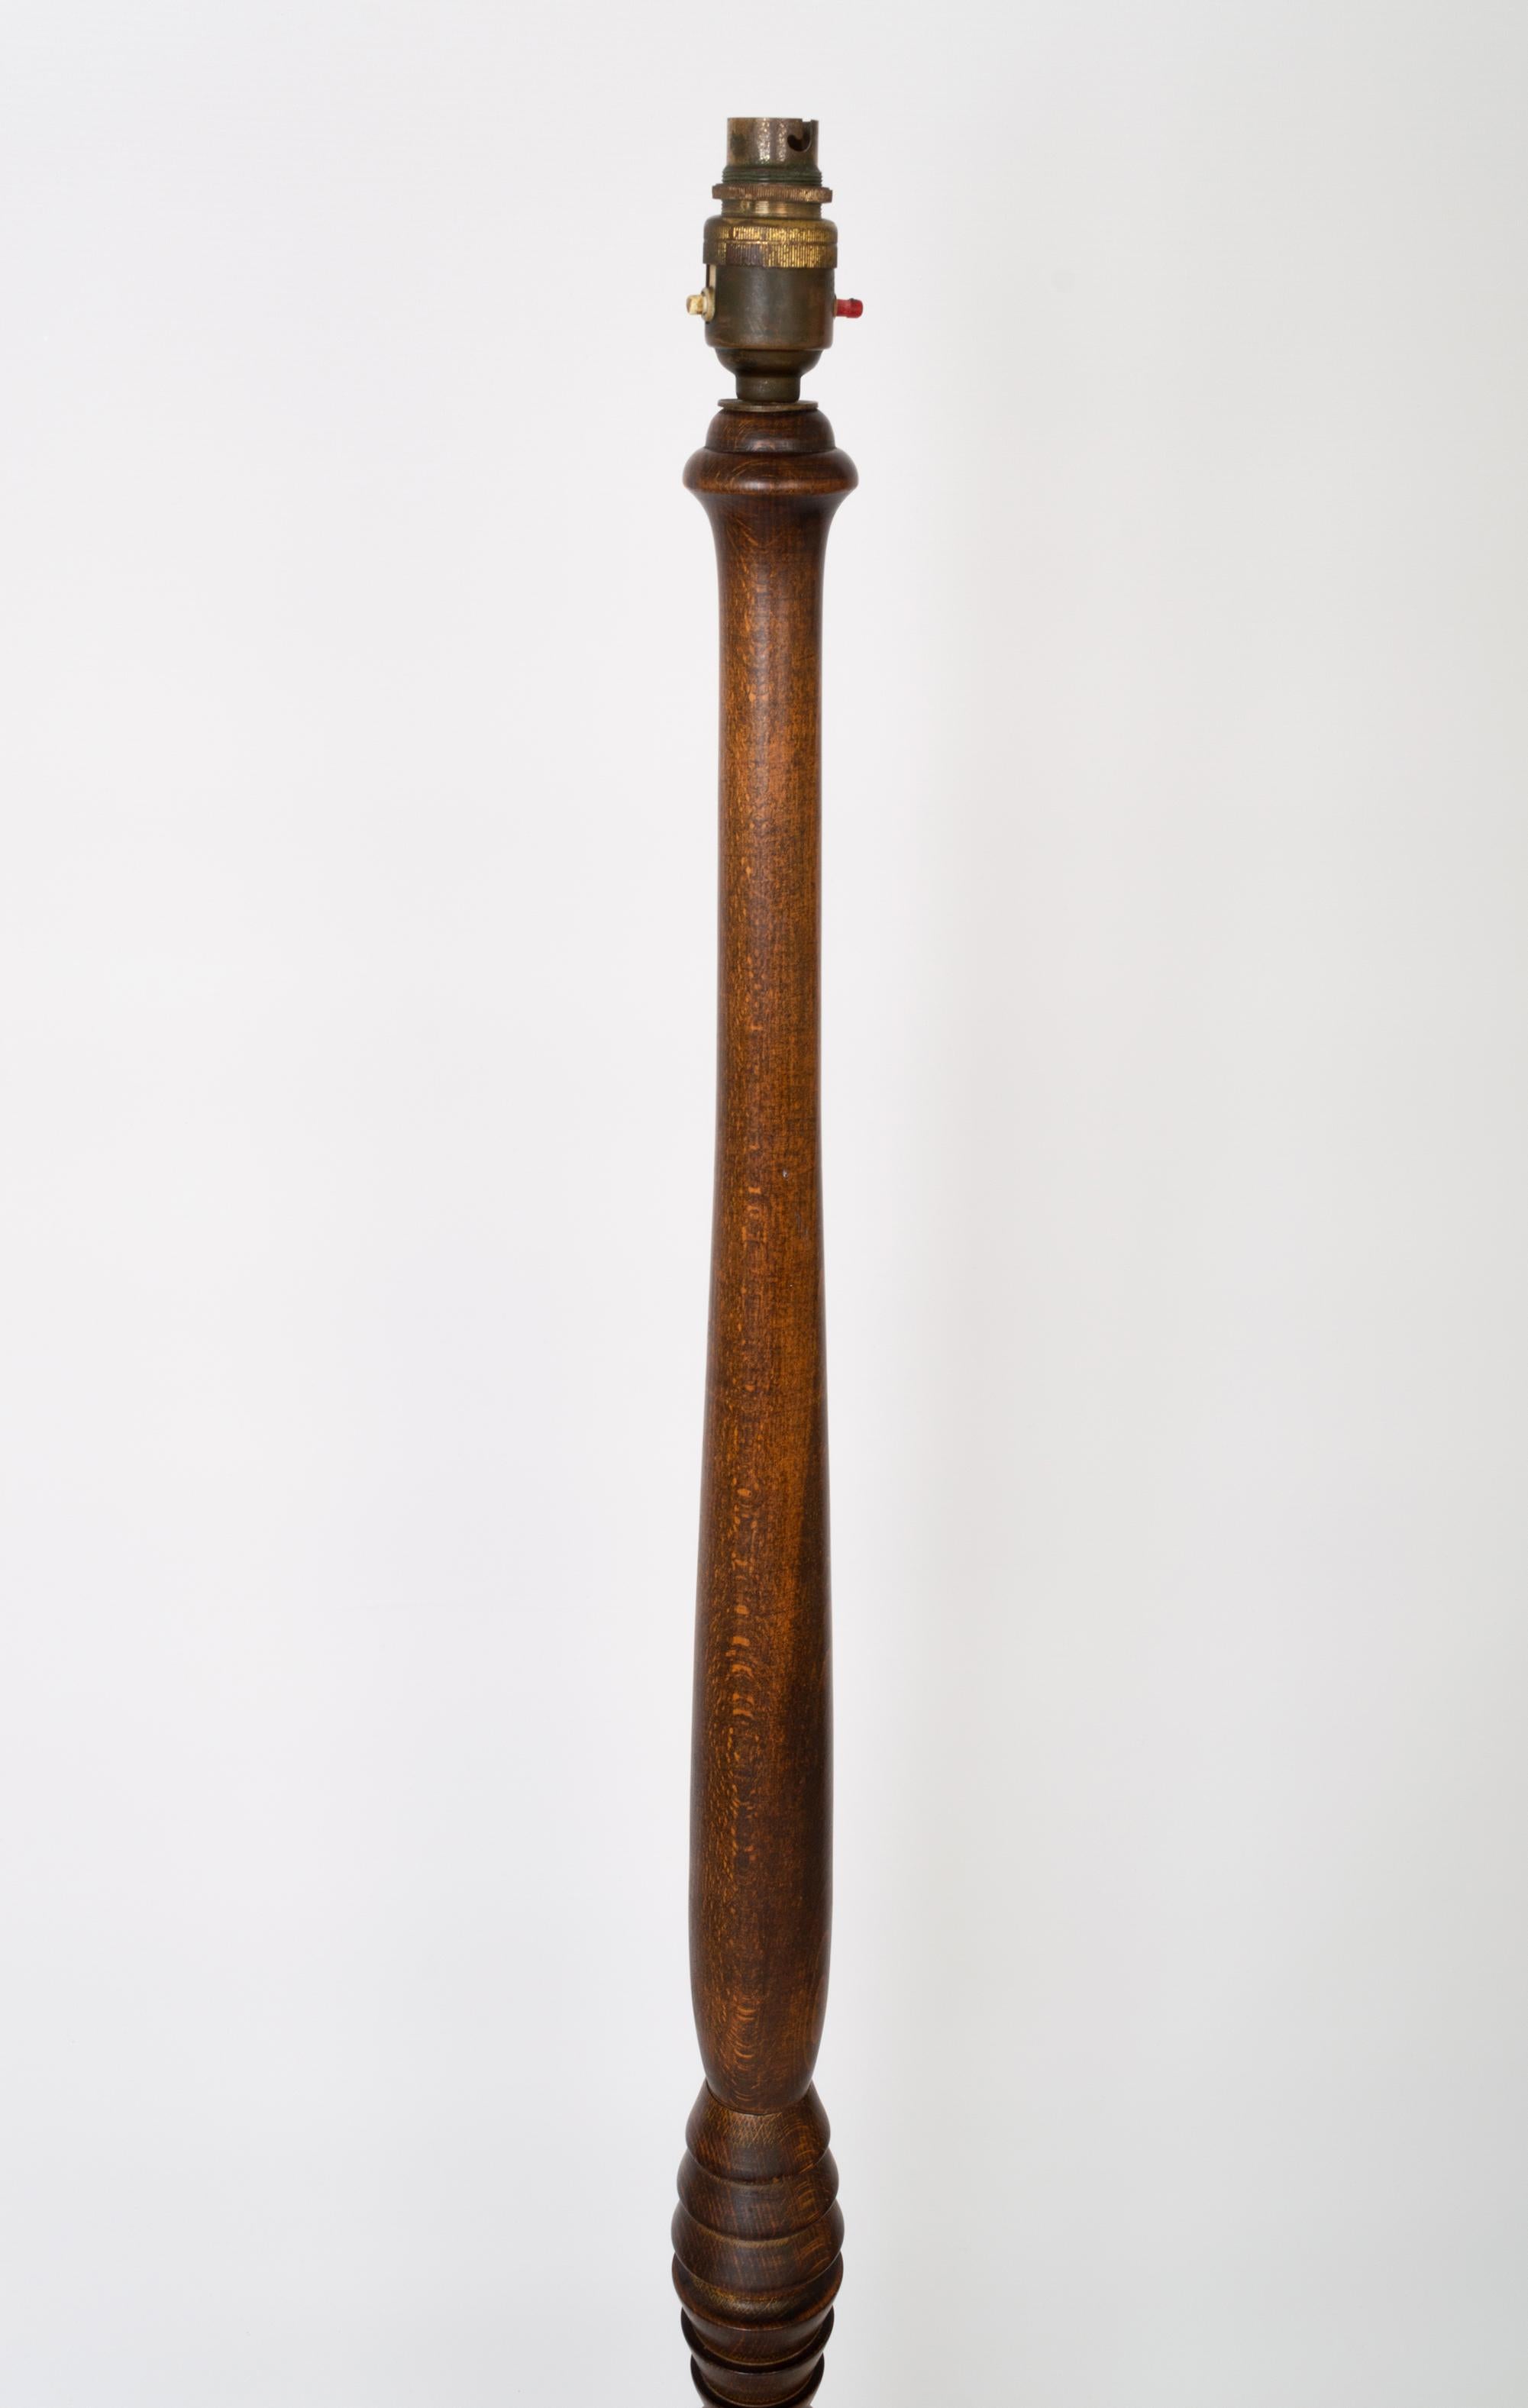 A French Art Deco wooden floor lamp C.1930 
Constructed from turned solid beech wood.
Presented in excellent vintage condition.
Shade not included (for illustrative purposes only).